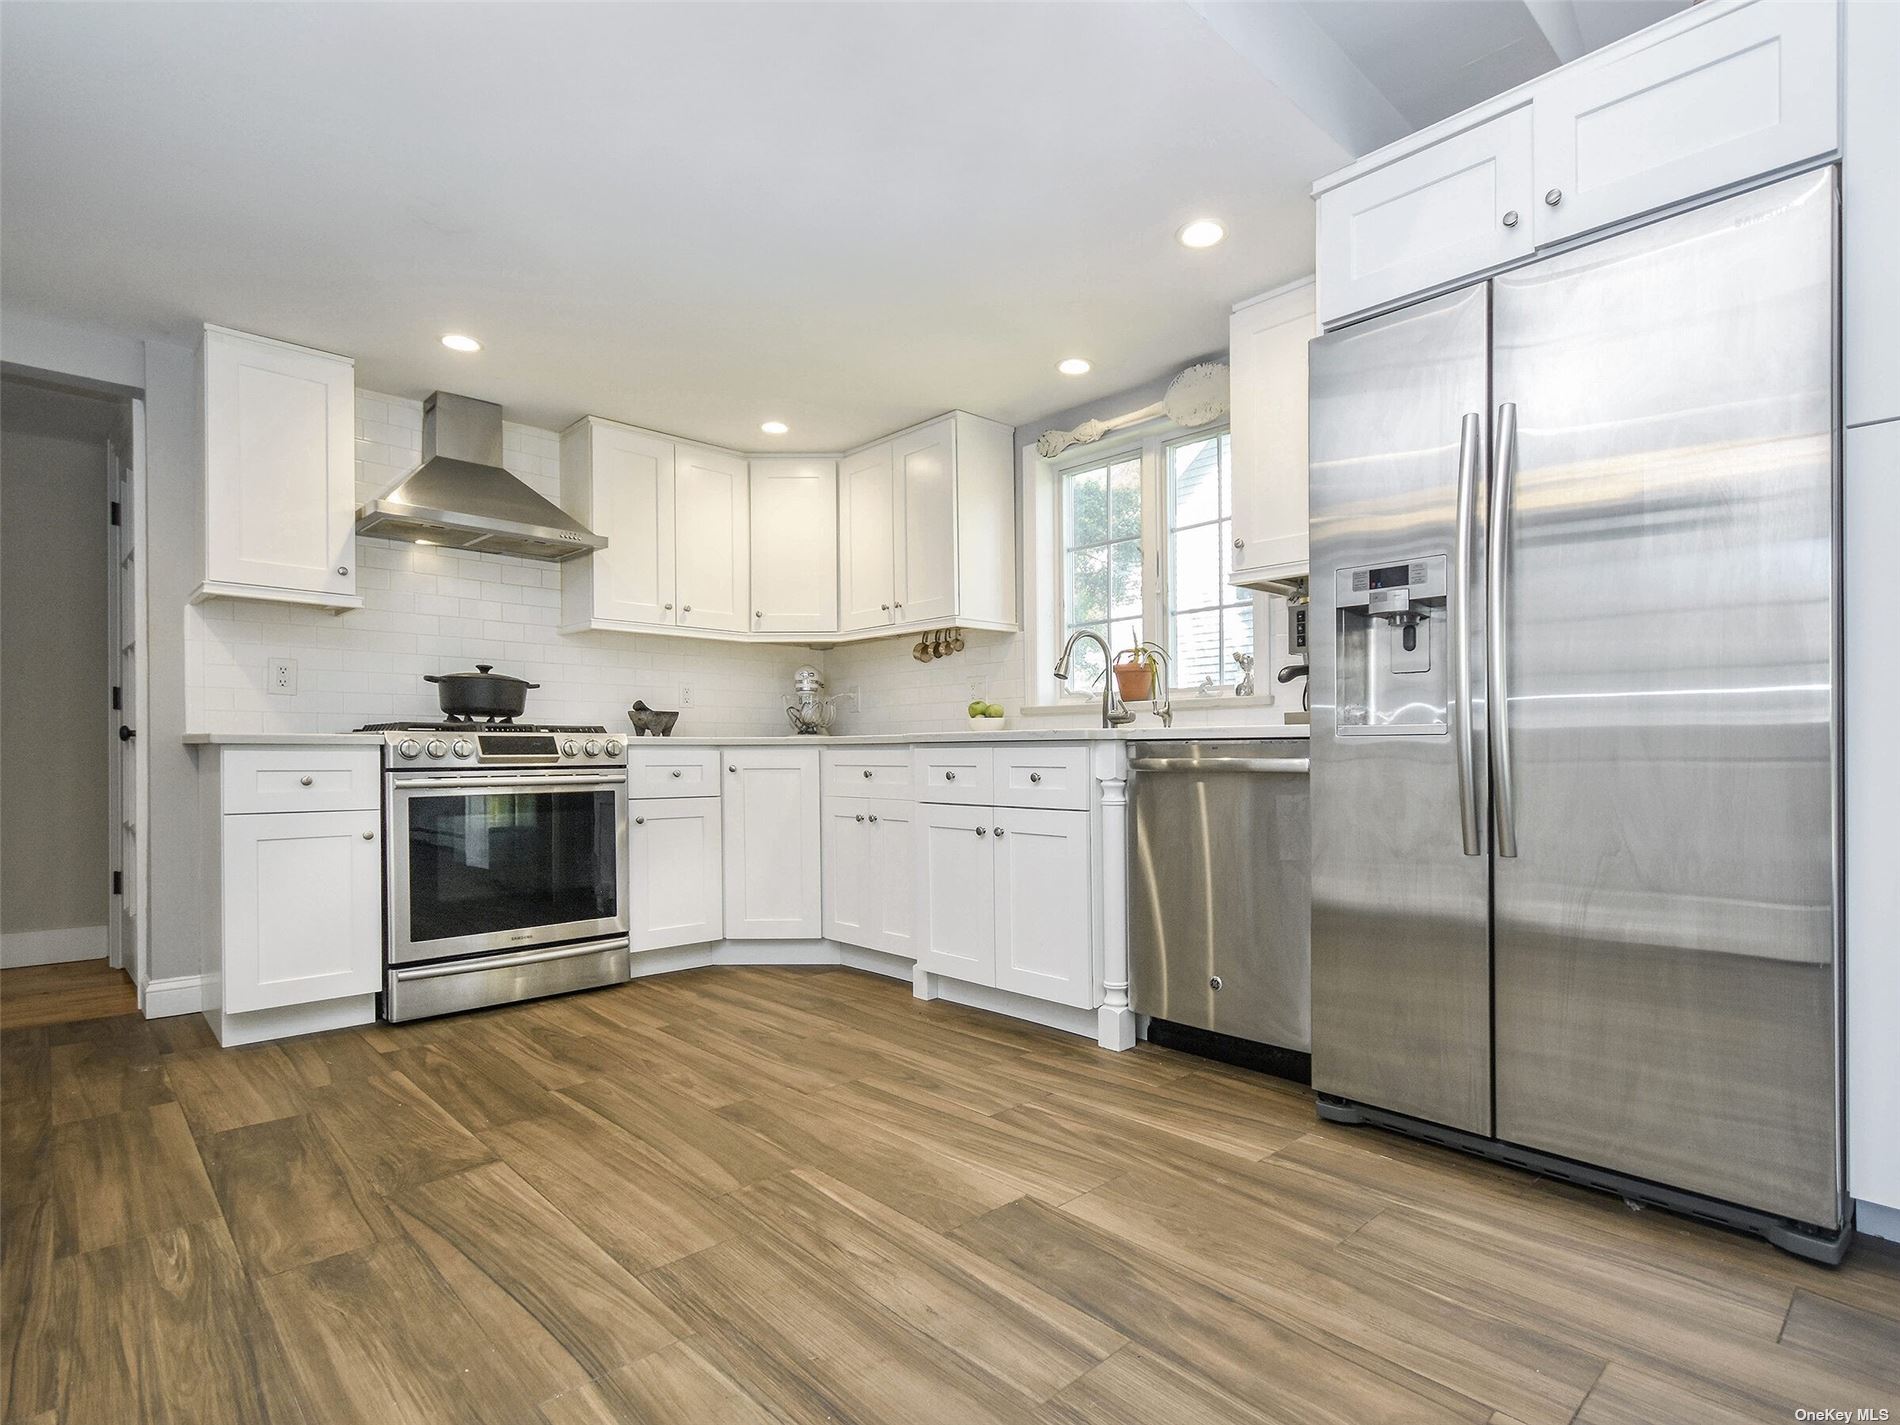 a kitchen with stainless steel appliances a refrigerator sink and white cabinets